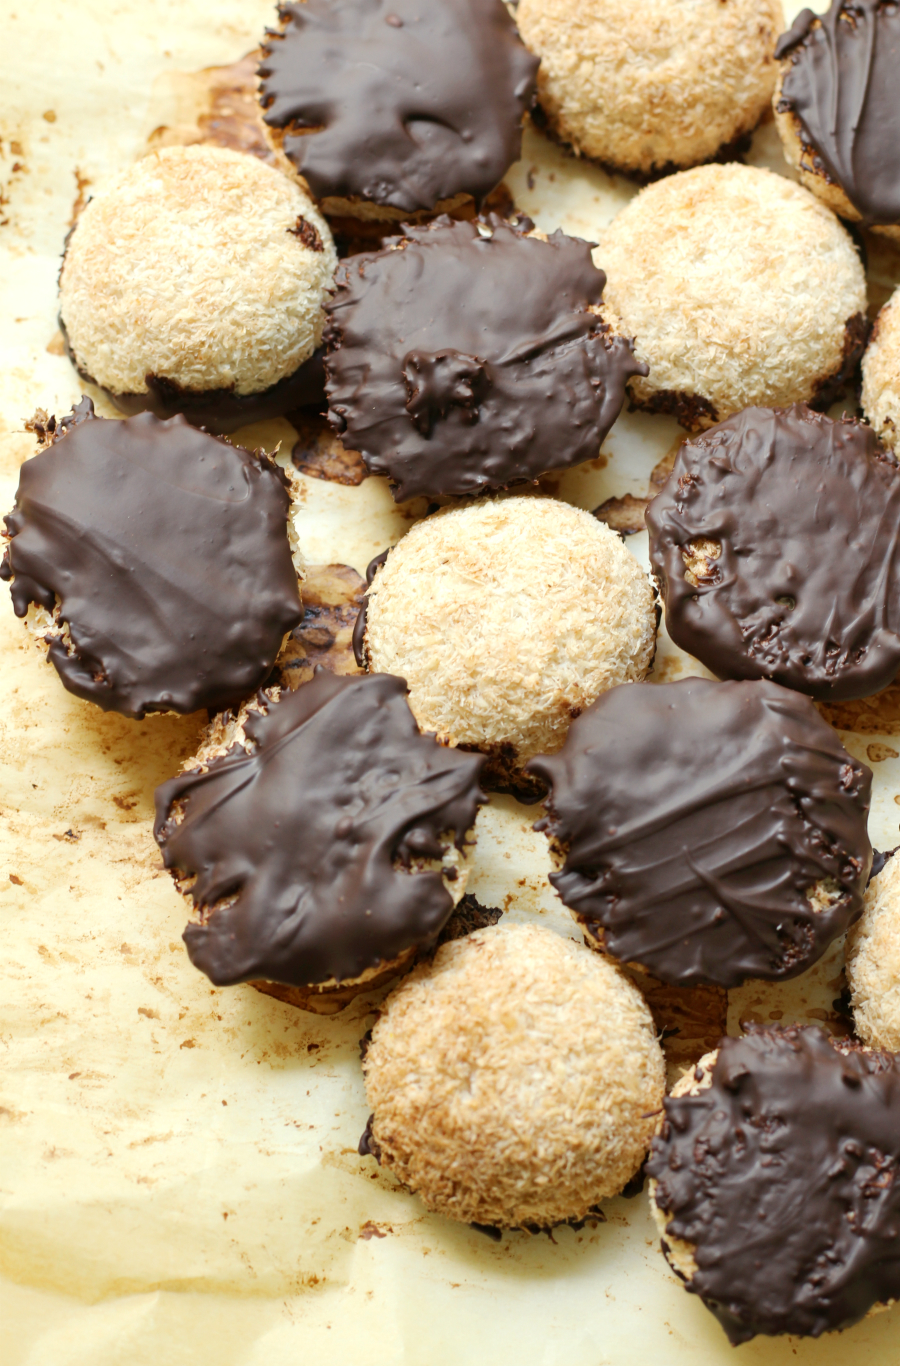 Chocolate-Dipped Coconut Macaroons | Strength and Sunshine @RebeccaGF666 A sweet and fancy treat for any occasion! Chocolate-Dipped Coconut Macaroons are a delicious and easy, gluten-free, vegan, paleo, and allergy-free dessert recipe. Everyone will be wowed by this healthy coconut and chocolate bite!